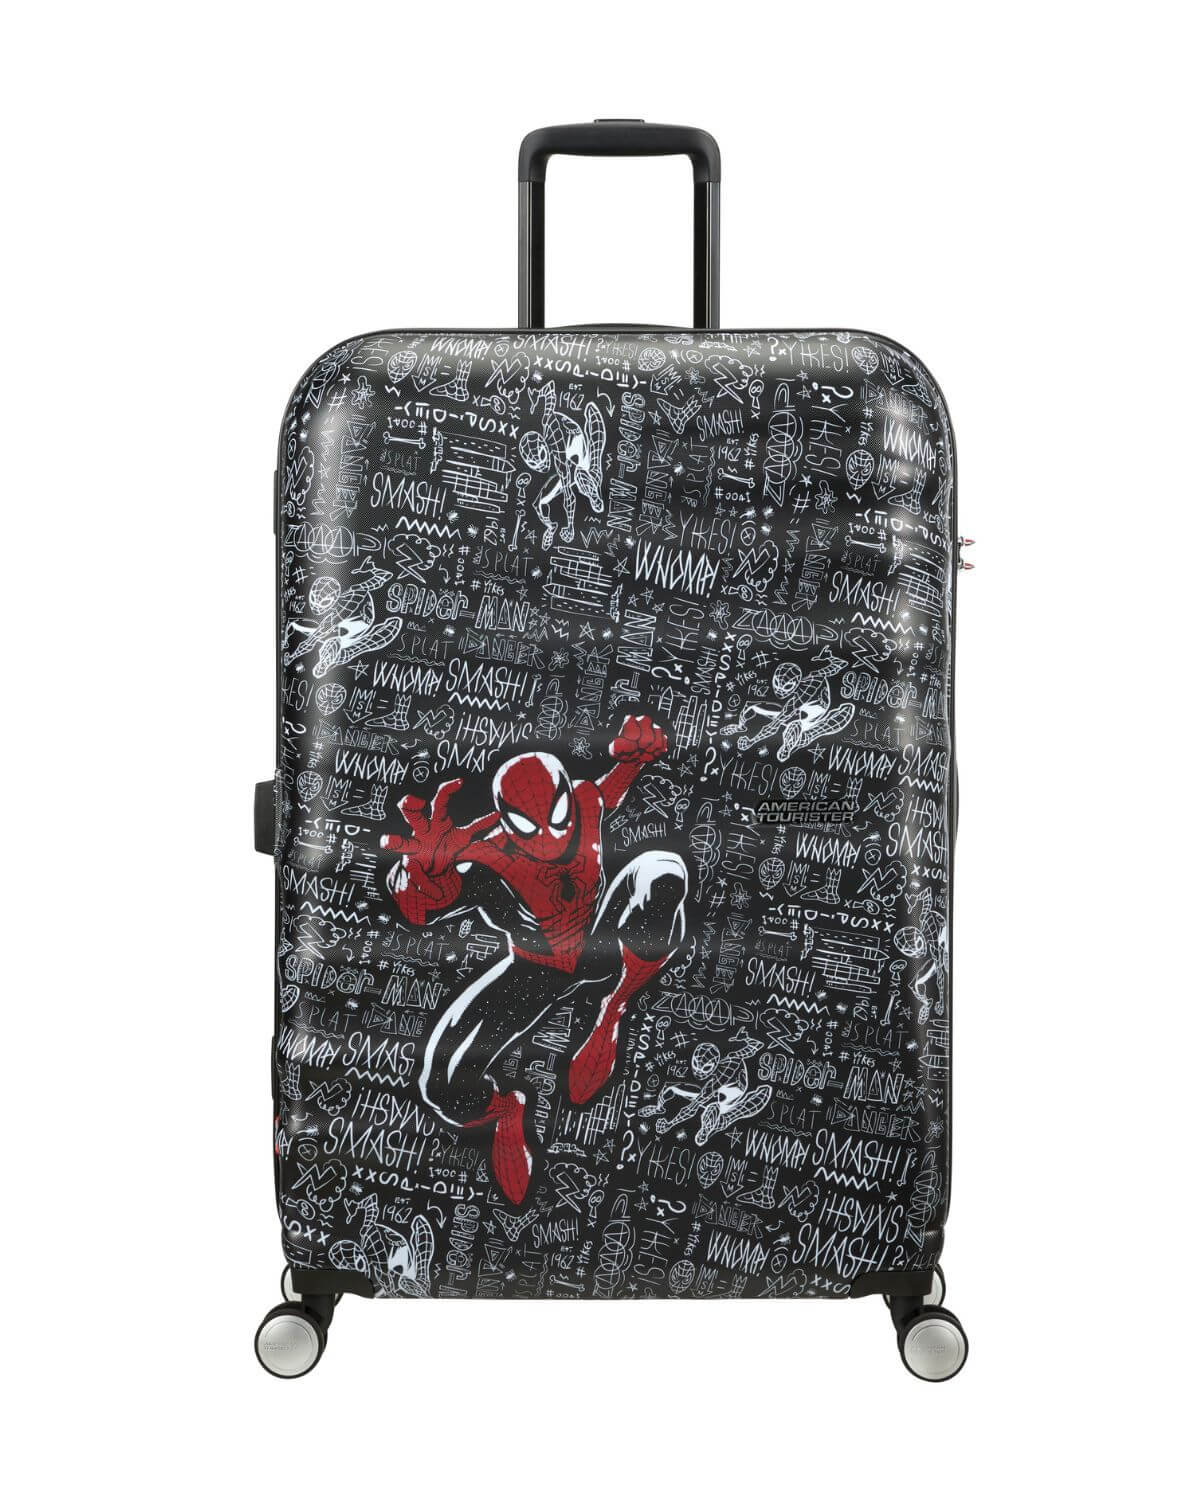 SPINNER AMERICAN TOURISTER SPIDERMAN SKETCH